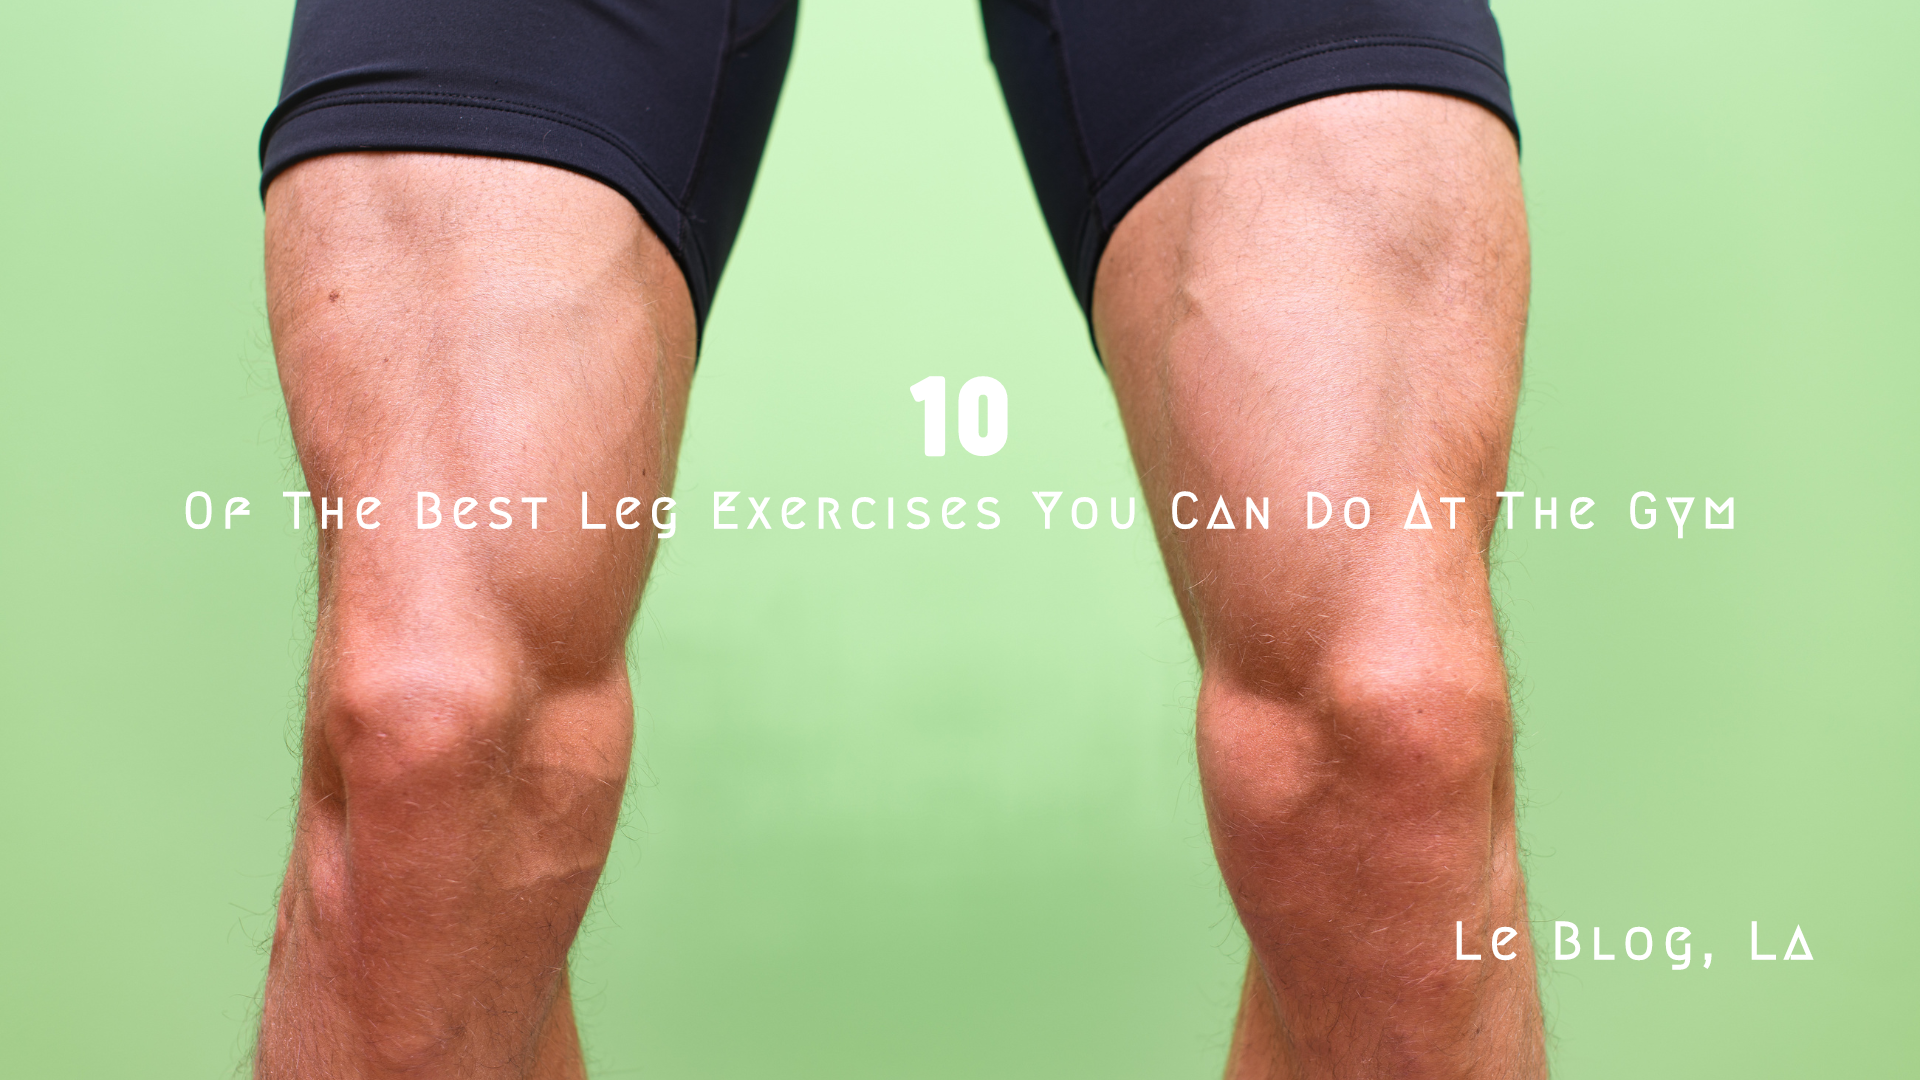 10 Of The Best Leg Exercises You Can Do At The Gym